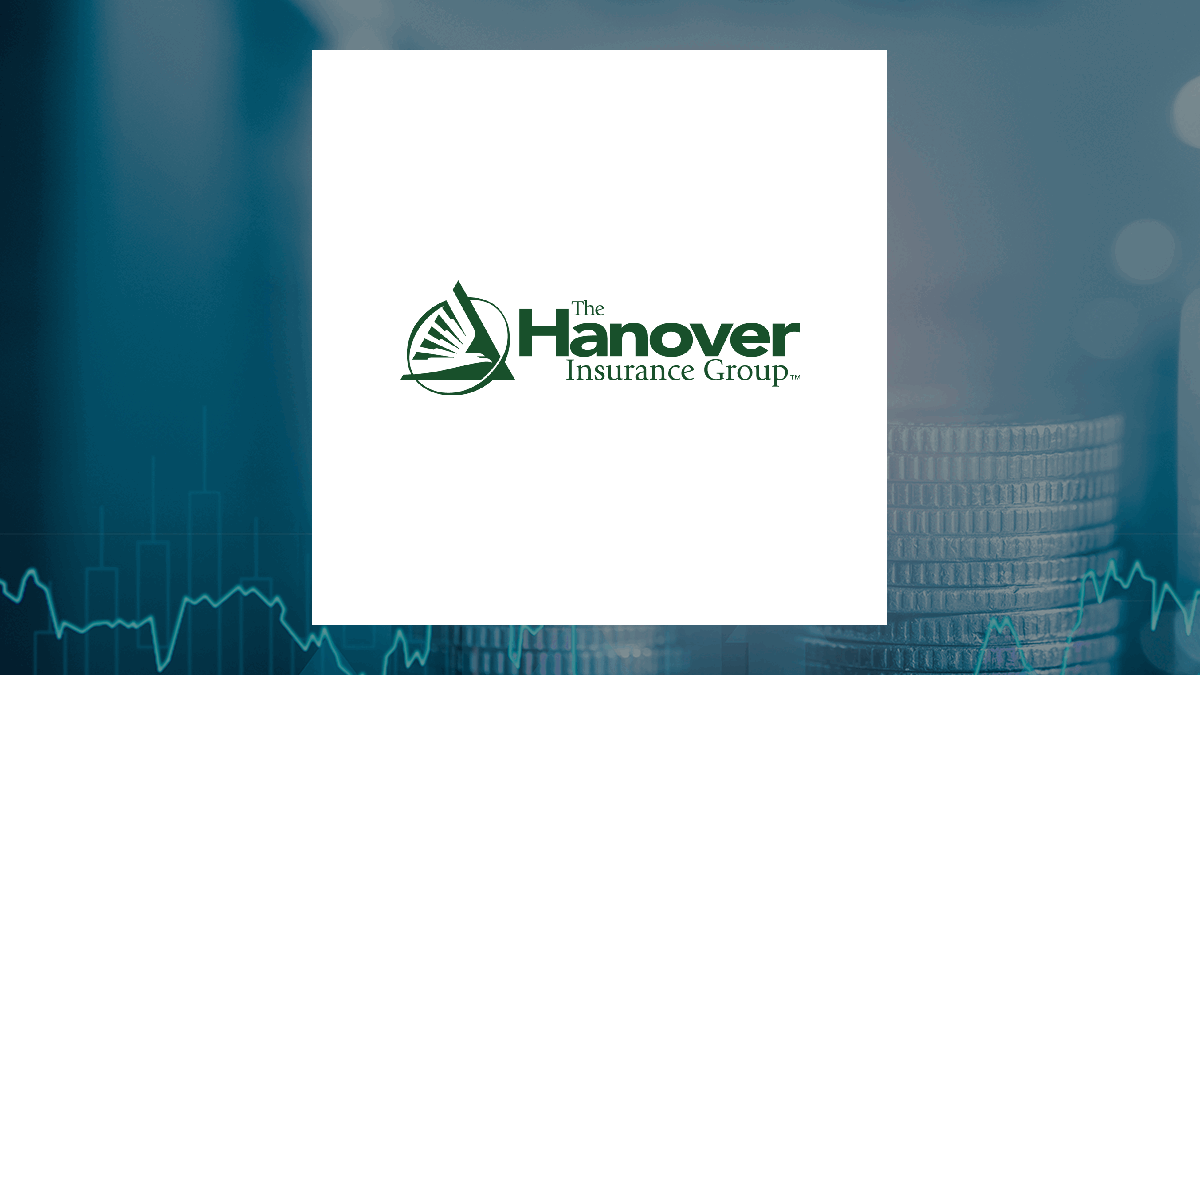 The Hanover Insurance Group logo with Finance background